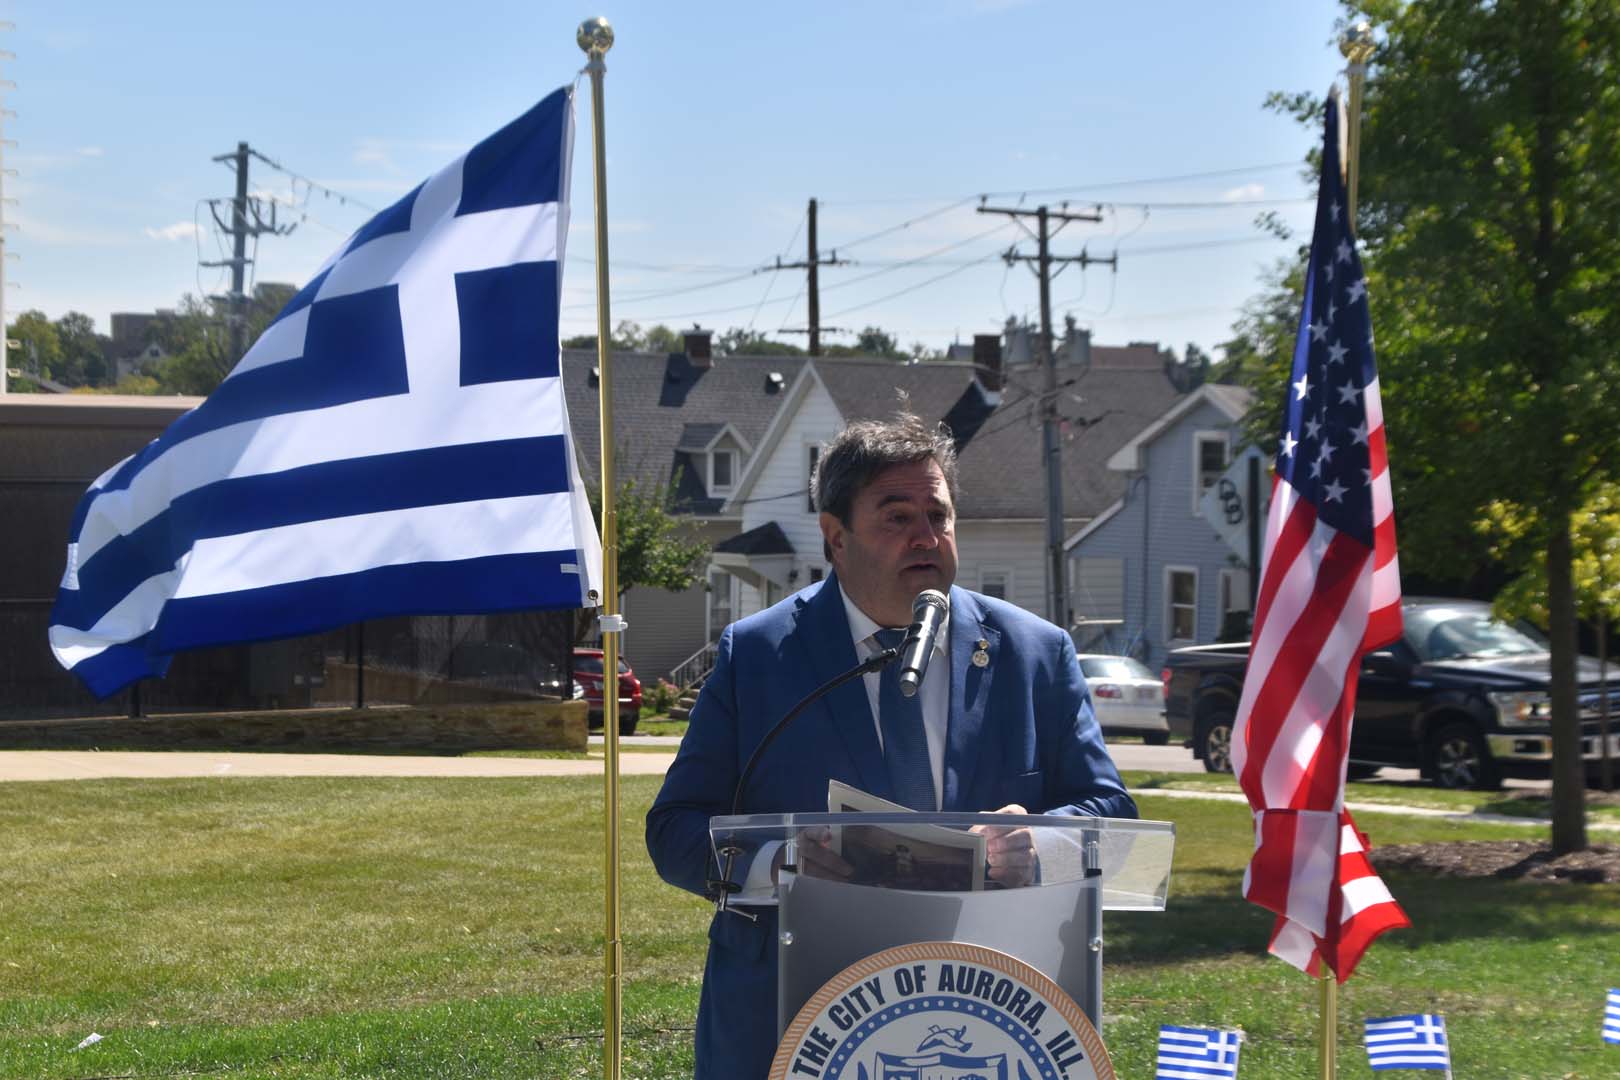 September 25th 2021 monument unveiled in Aurora Illinois - Louis Atsaves, Supreme Vice President, AHEPA